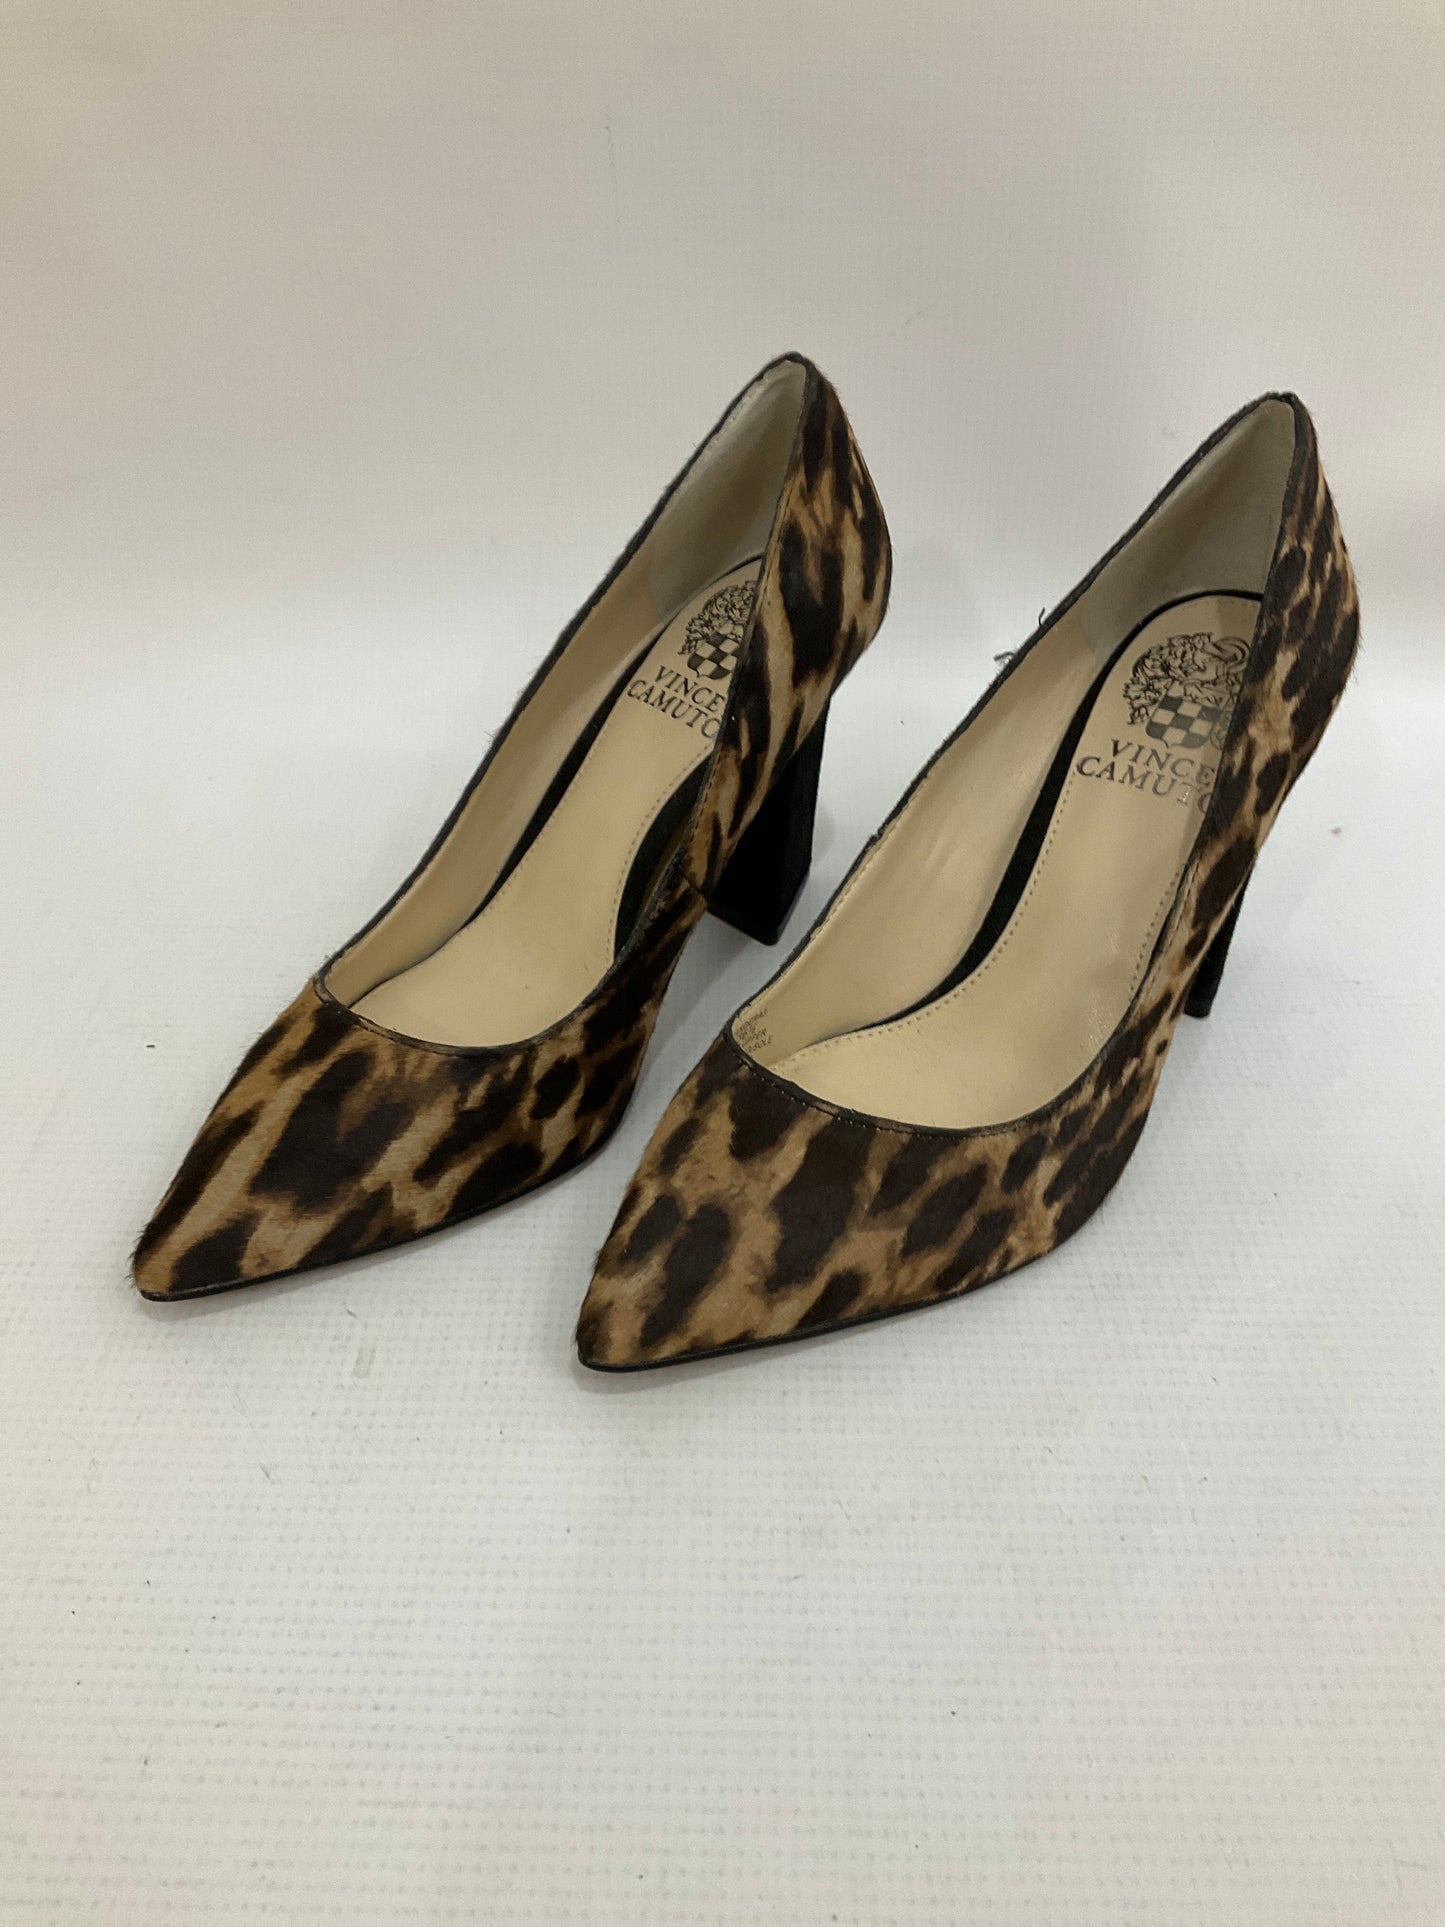 Shoes Heels Stiletto By Vince Camuto  Size: 6